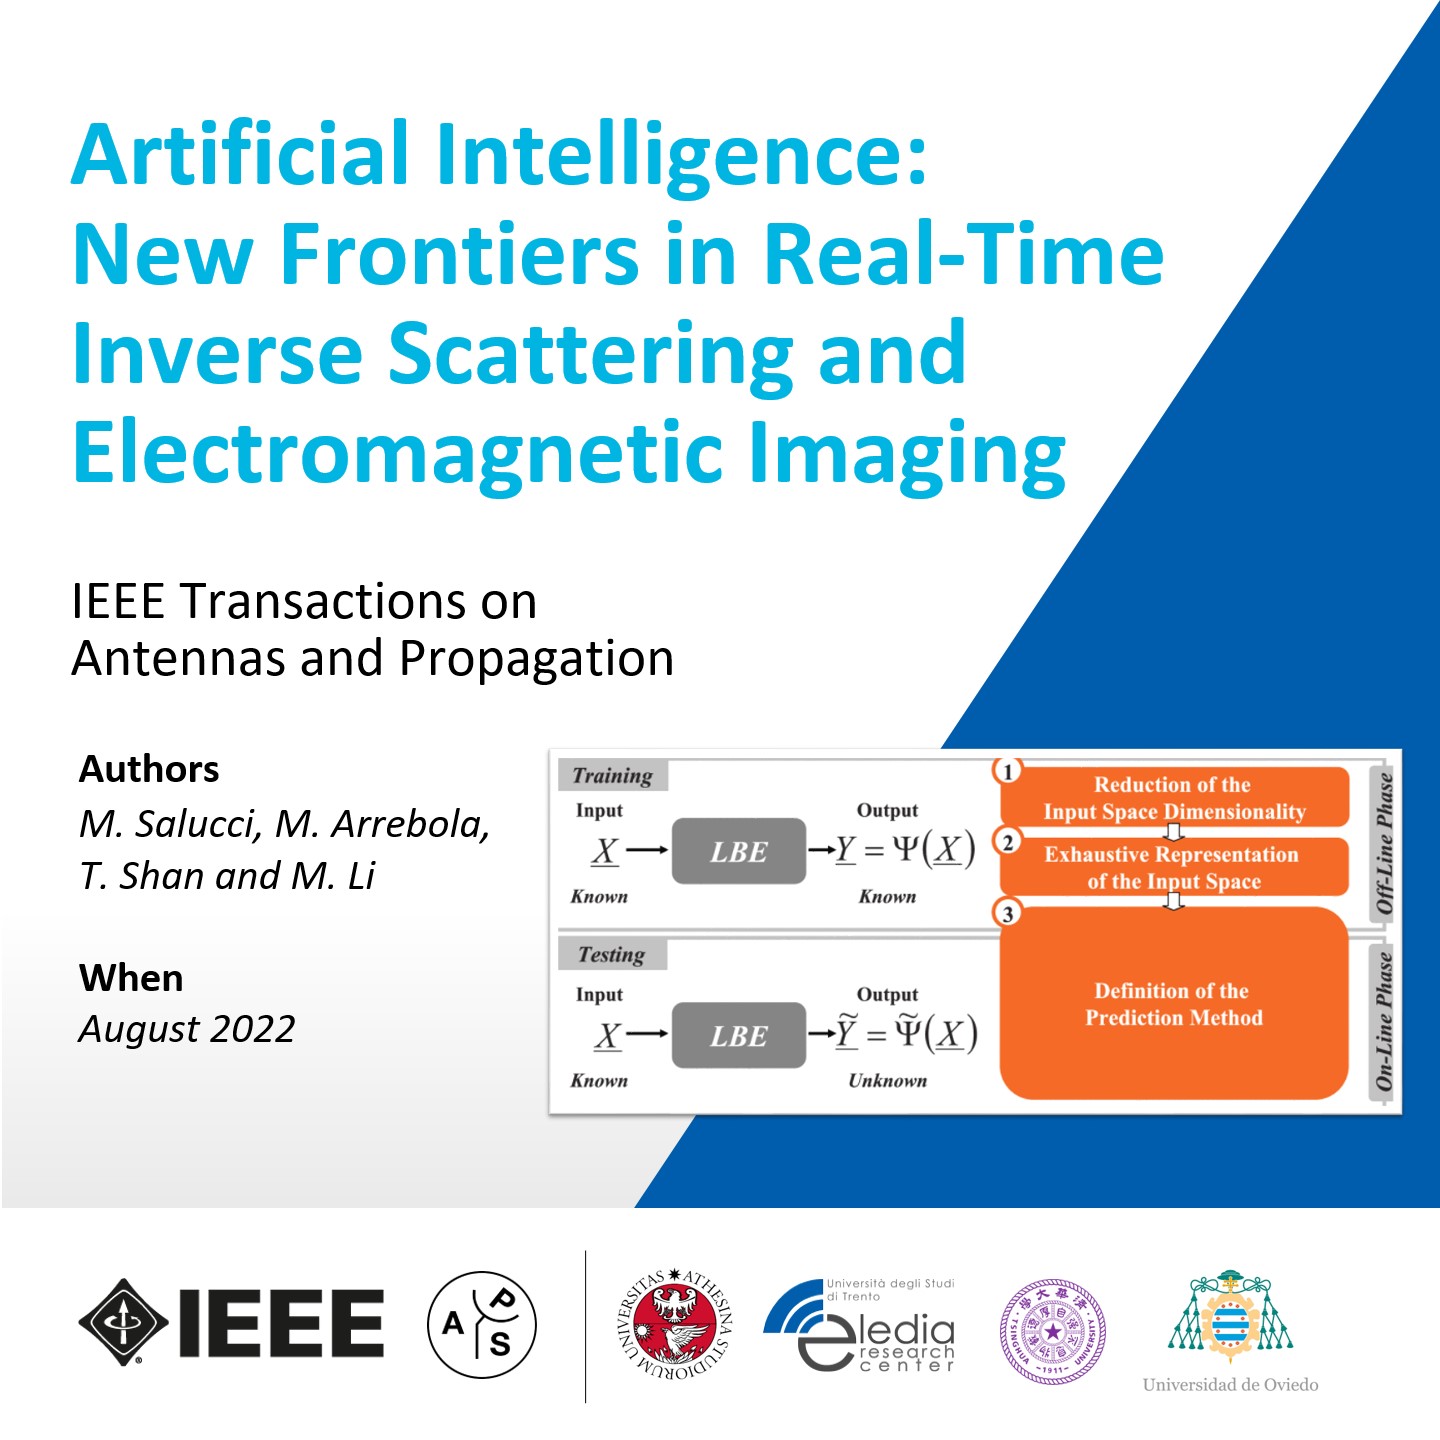 "Artificial Intelligence New Frontiers in RealTime Inverse Scattering